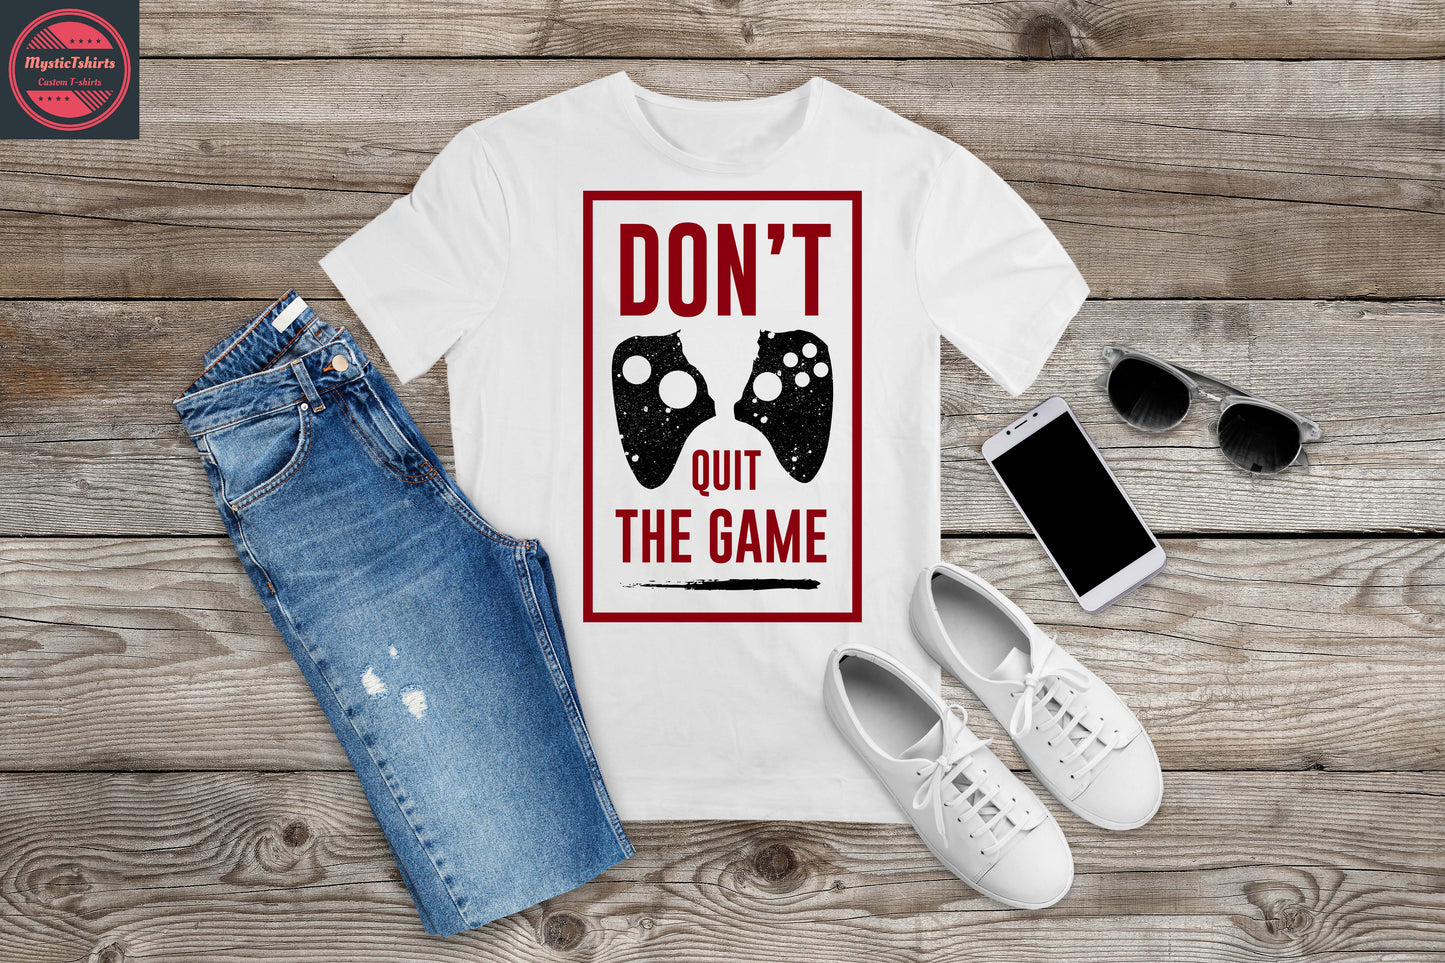 119. DON'T QUIT THE GAME, Custom Made Shirt, Personalized T-Shirt, Custom Text, Make Your Own Shirt, Custom Tee